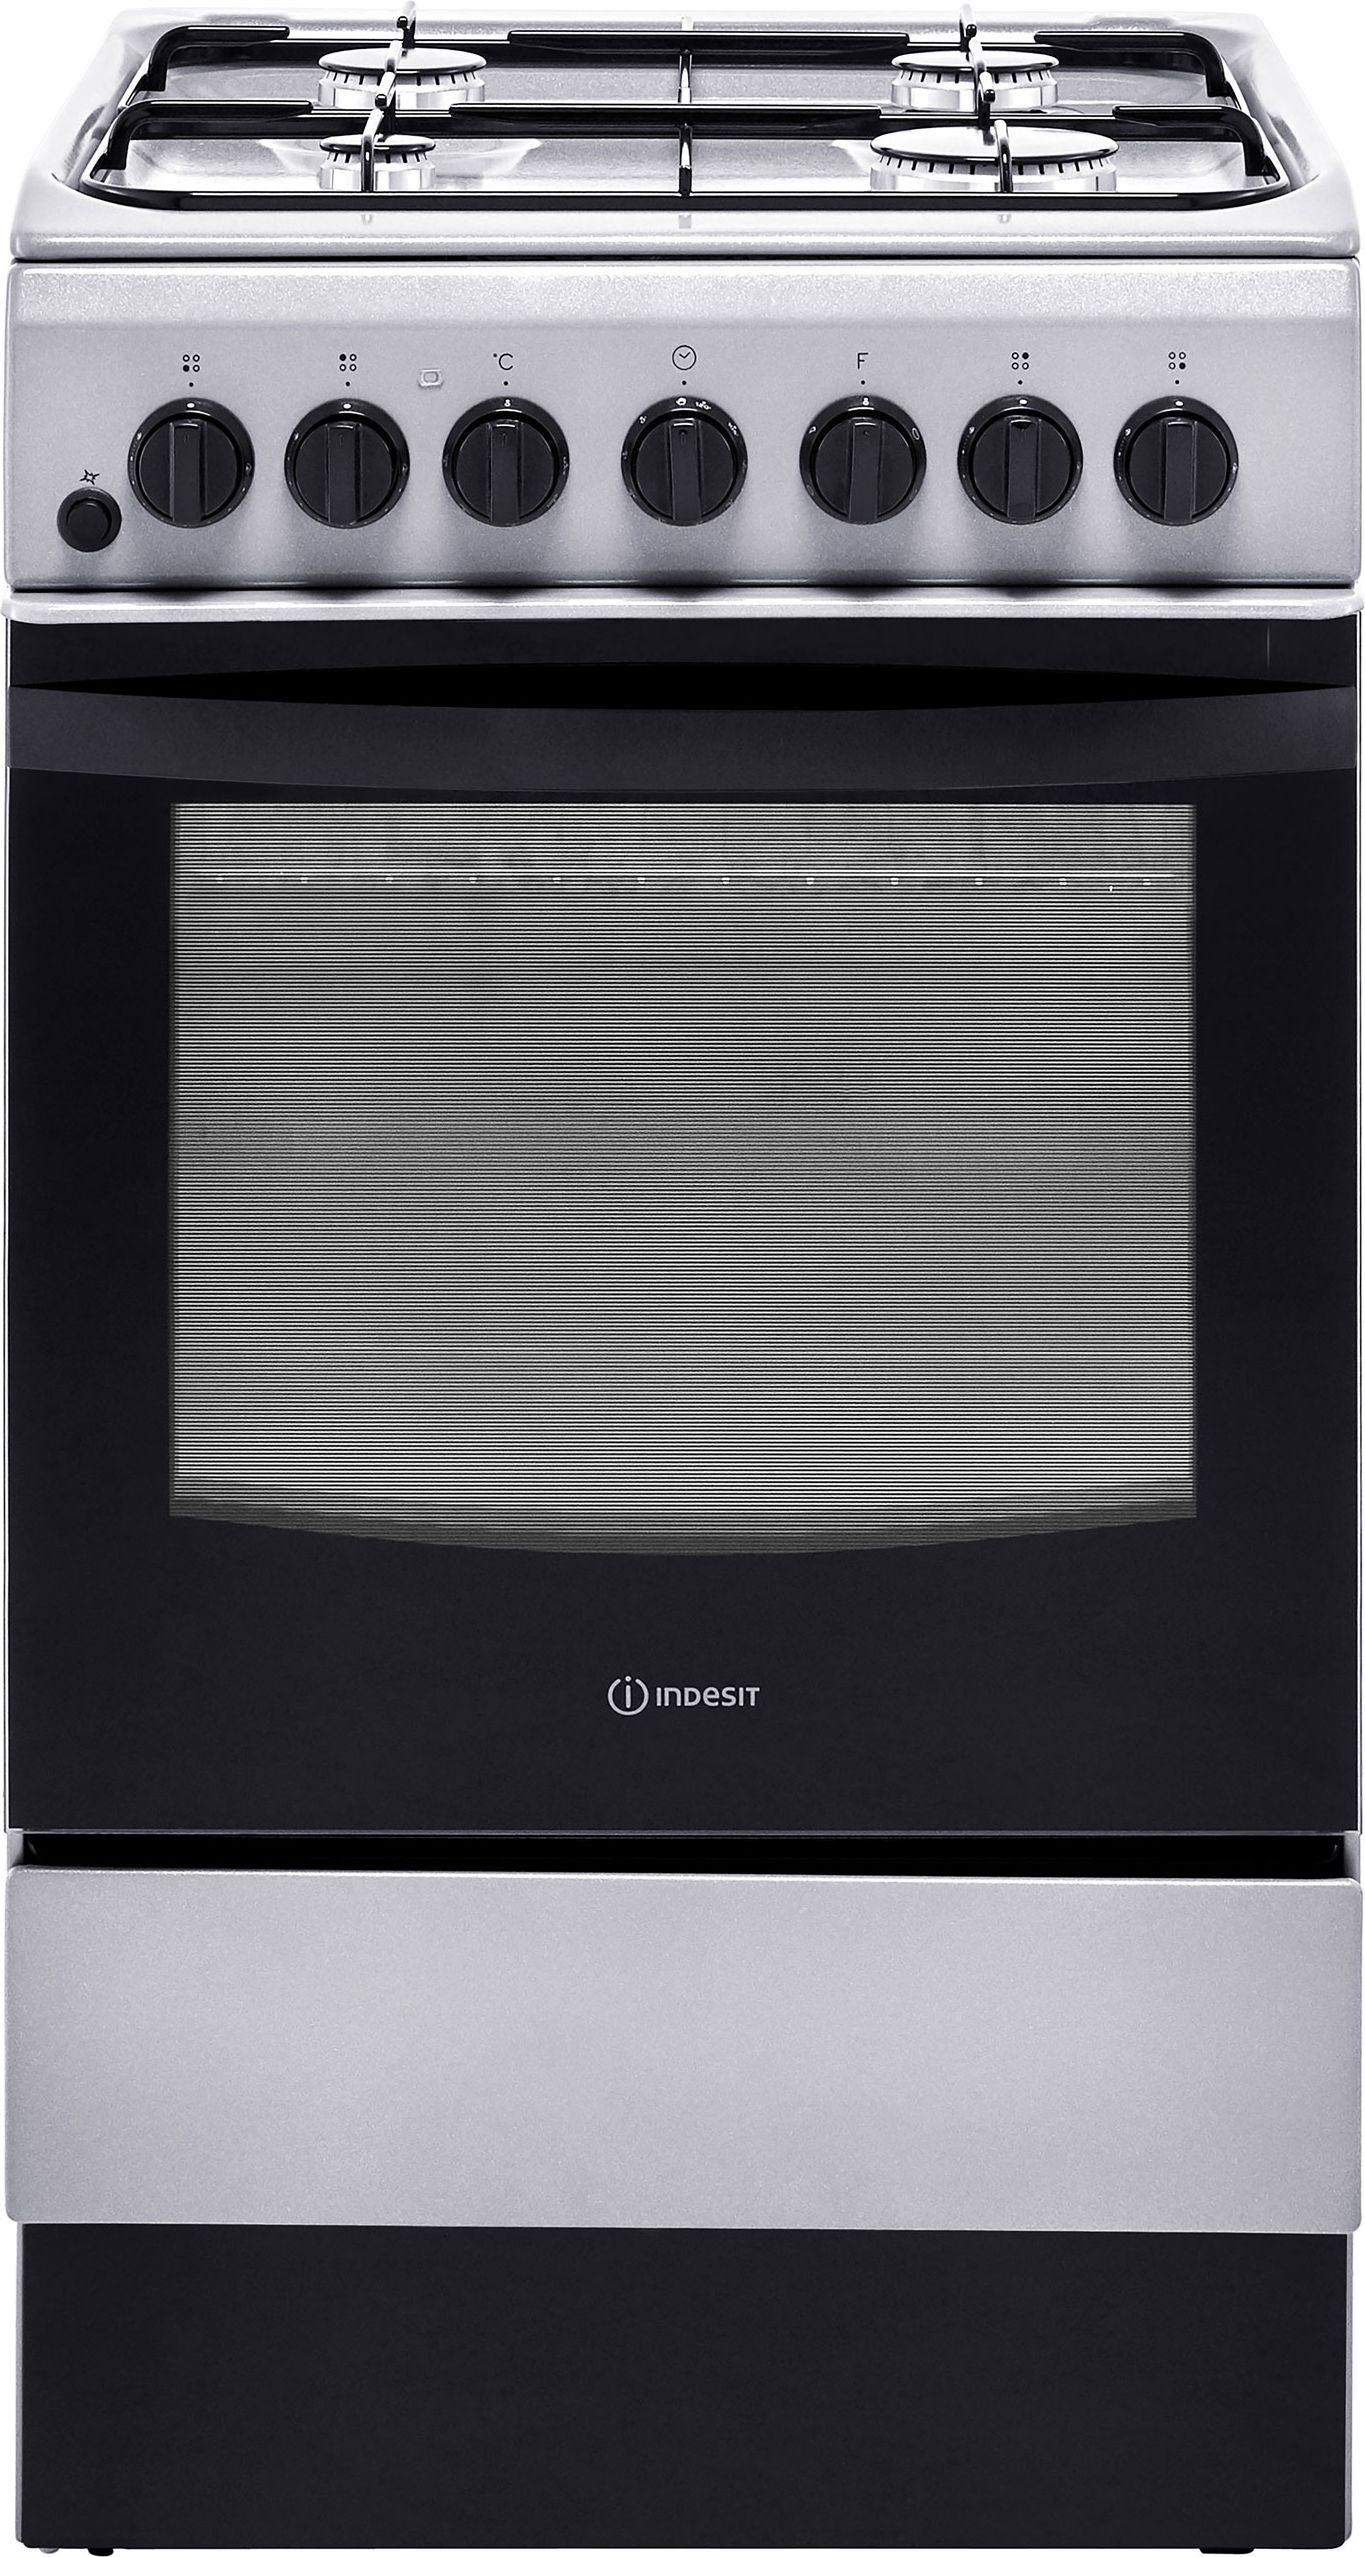 Indesit Cloe IS5G4PHX 50cm Freestanding Dual Fuel Cooker - Silver - A Rated, Silver